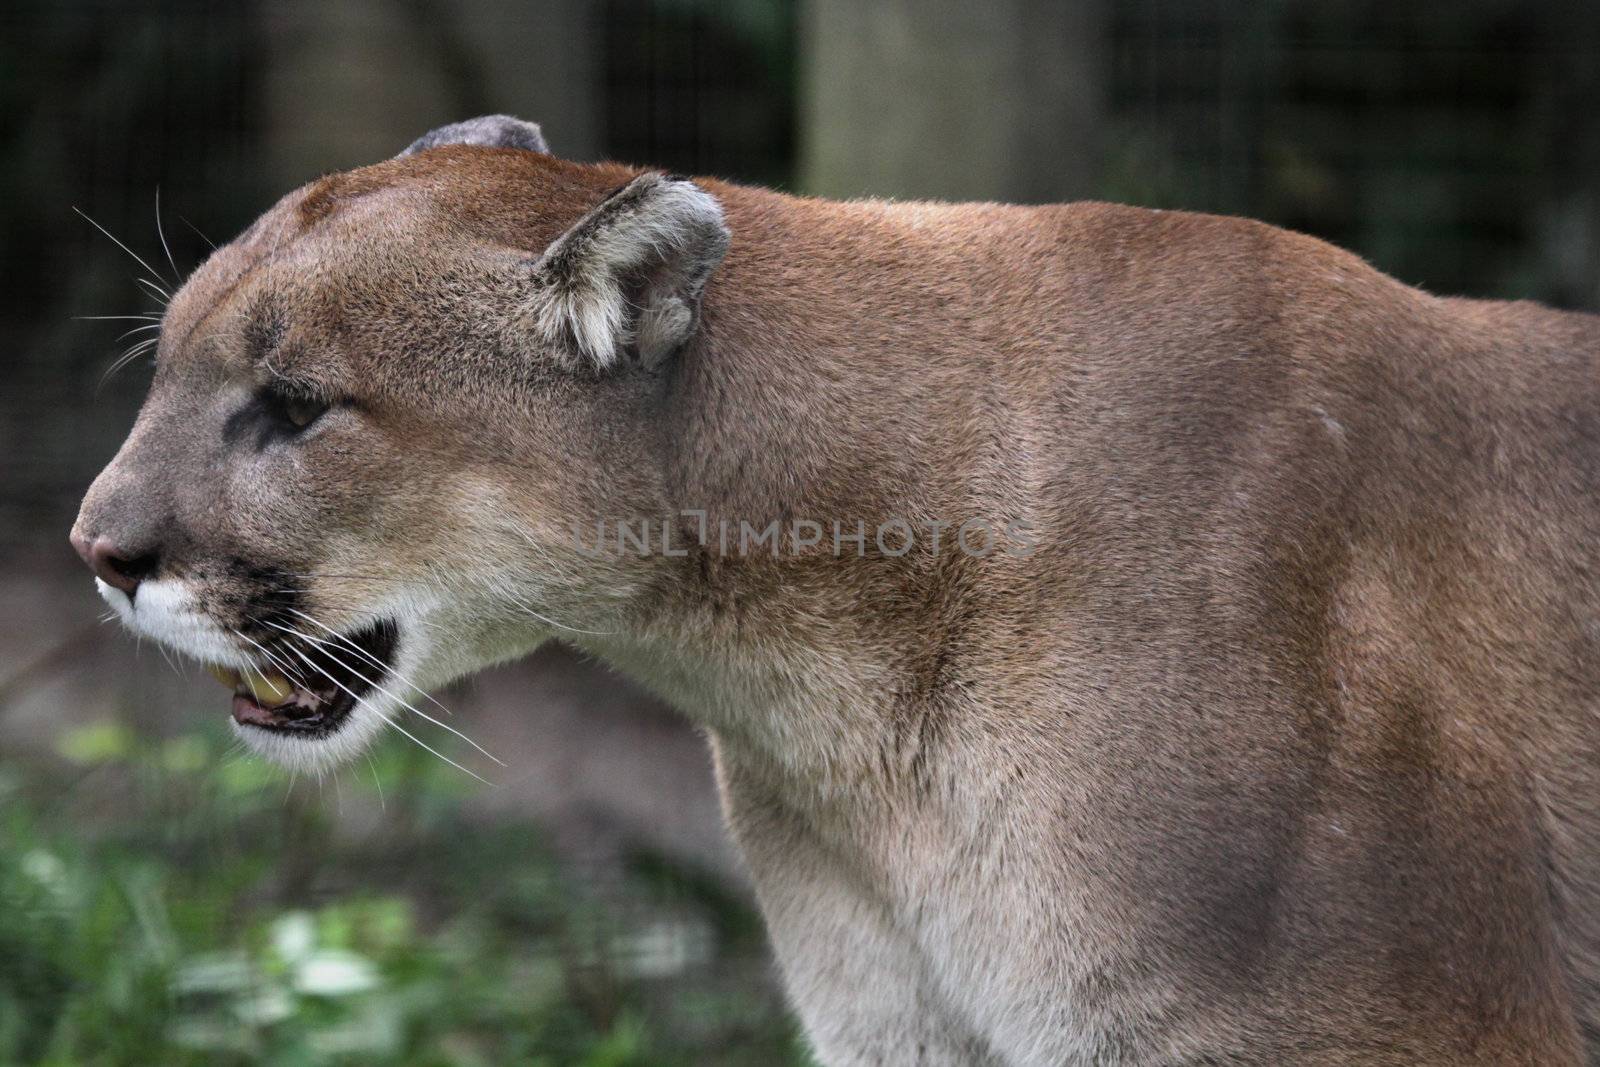 A cougar on the prowl (Felis concolor) in it's pen.